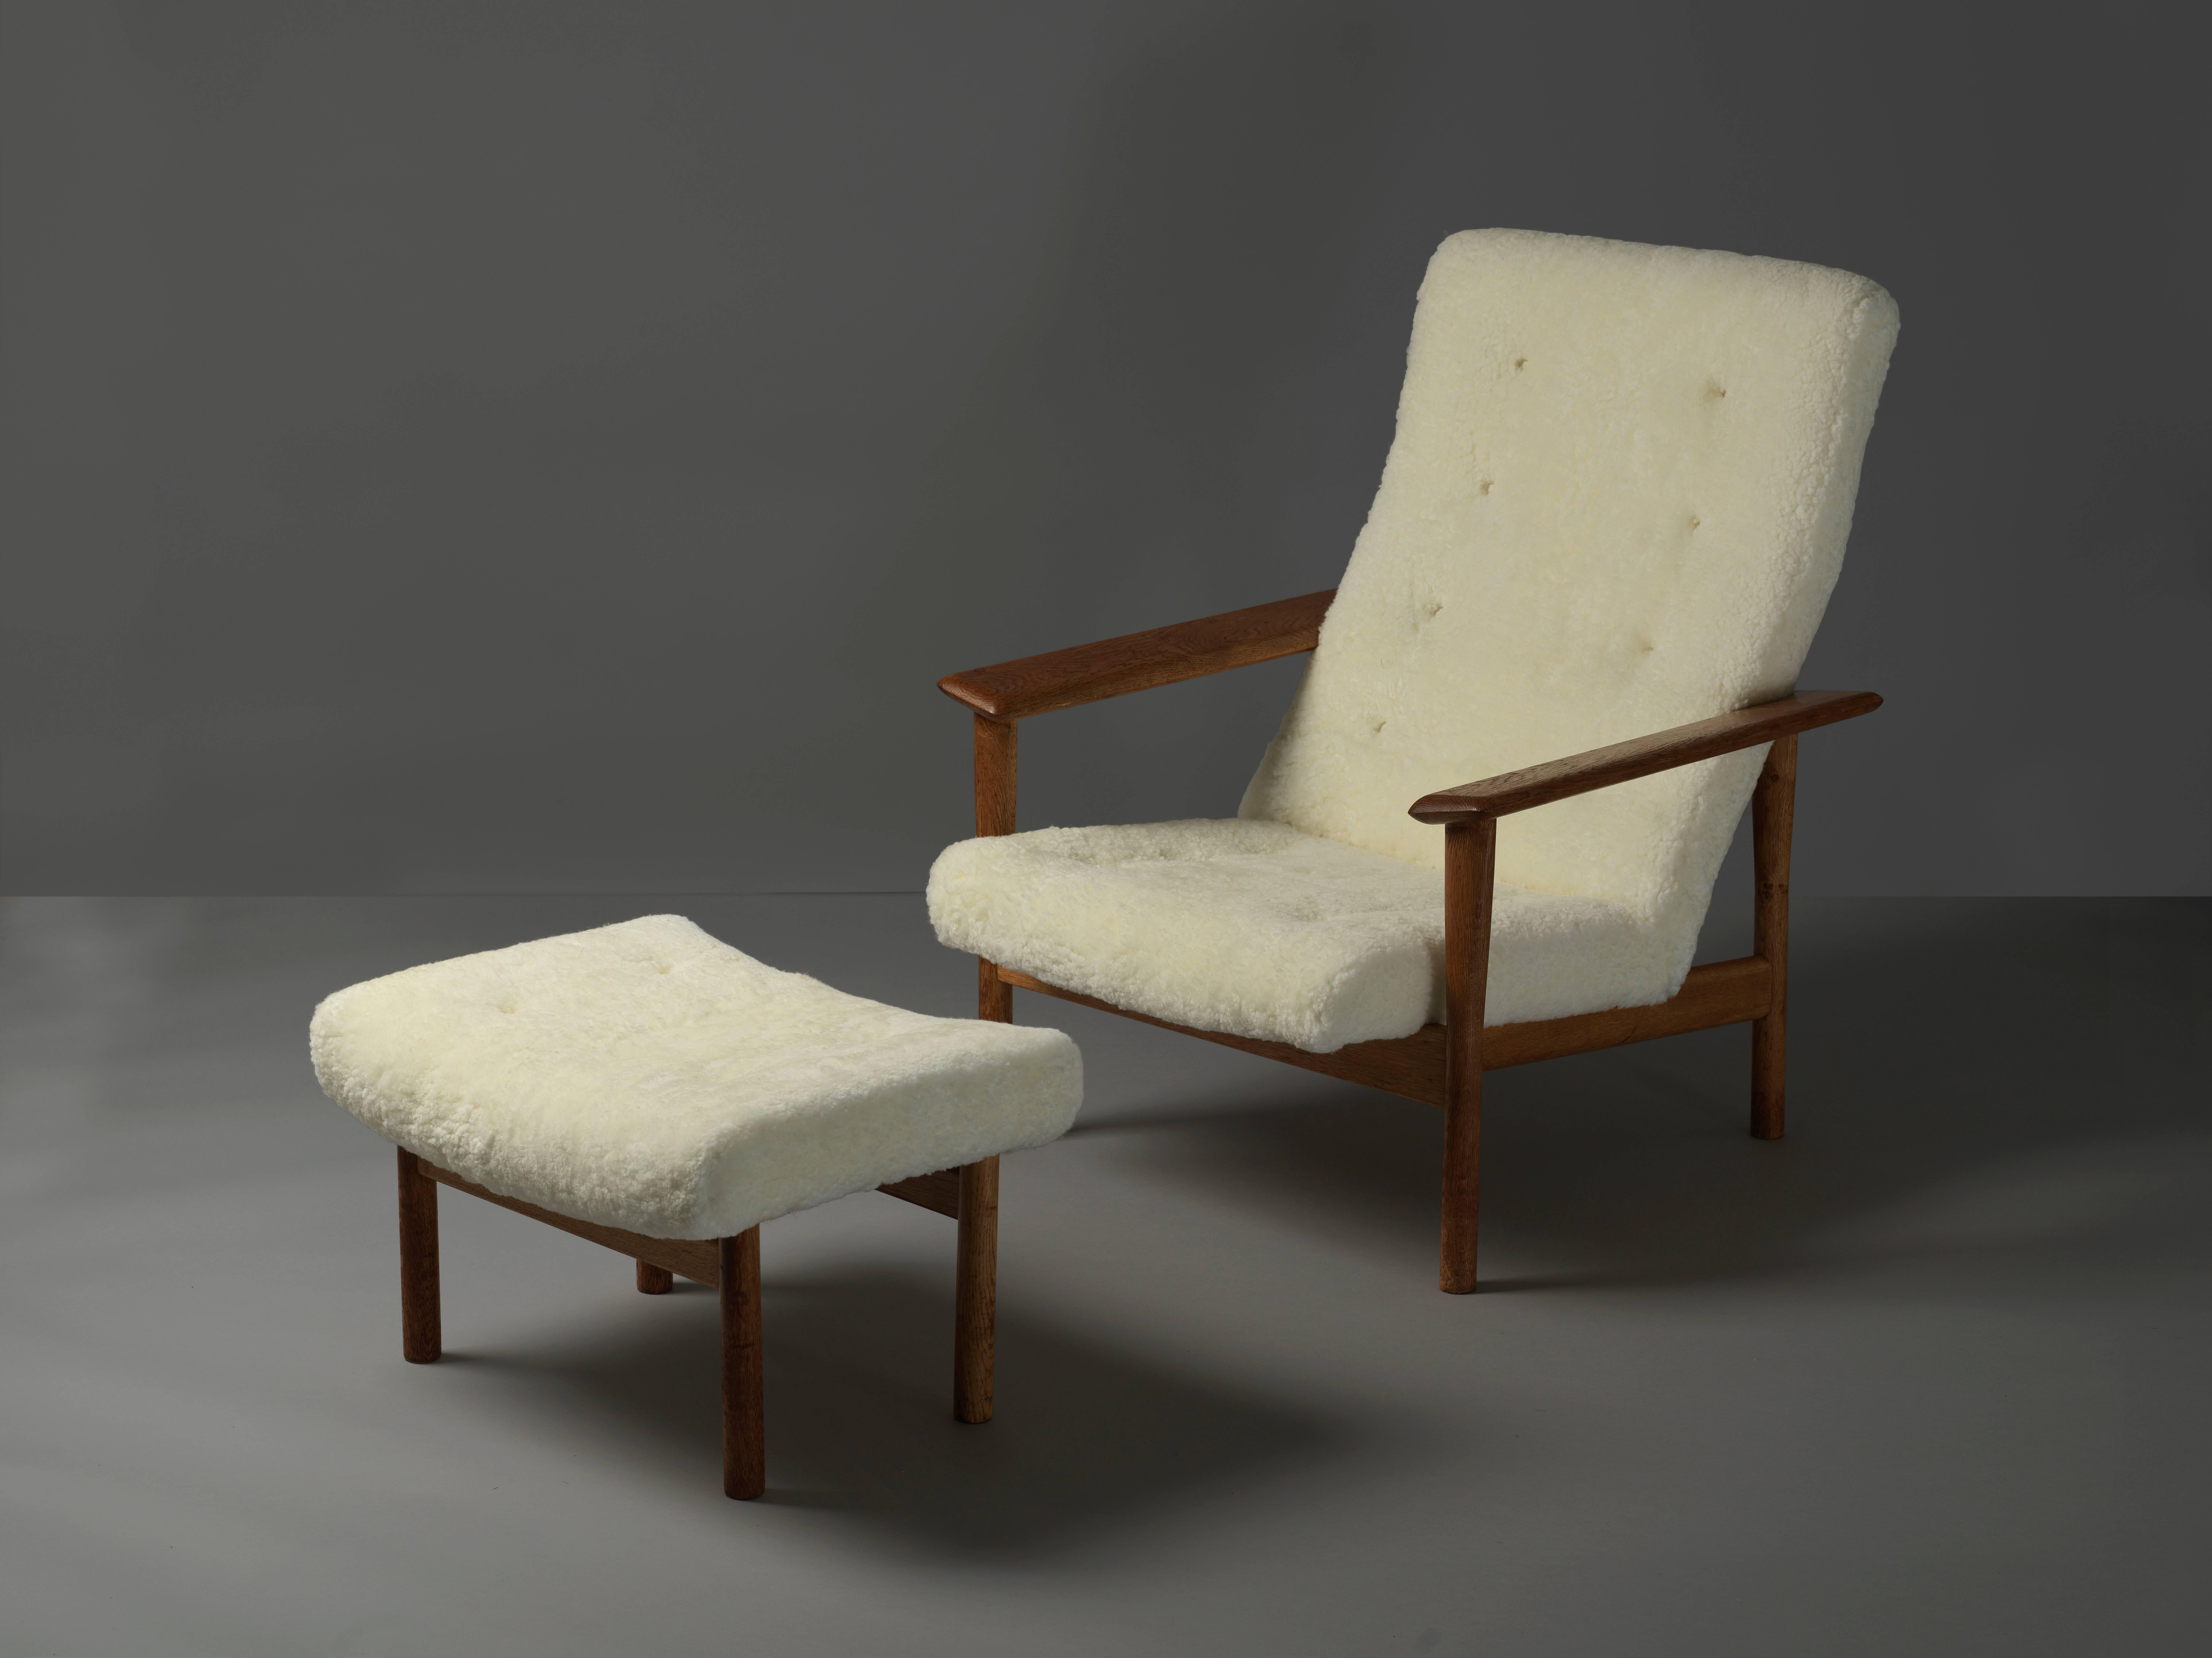 A Danish high back lounge chair with ottoman designed by Ejner Larsen & Axel Bender Madsen. Executed by cabinetmaker Willy Beck, Denmark and marked with a metal label. Upholstered in lambskin. 

Designed in 1961 and prominently displayed in the